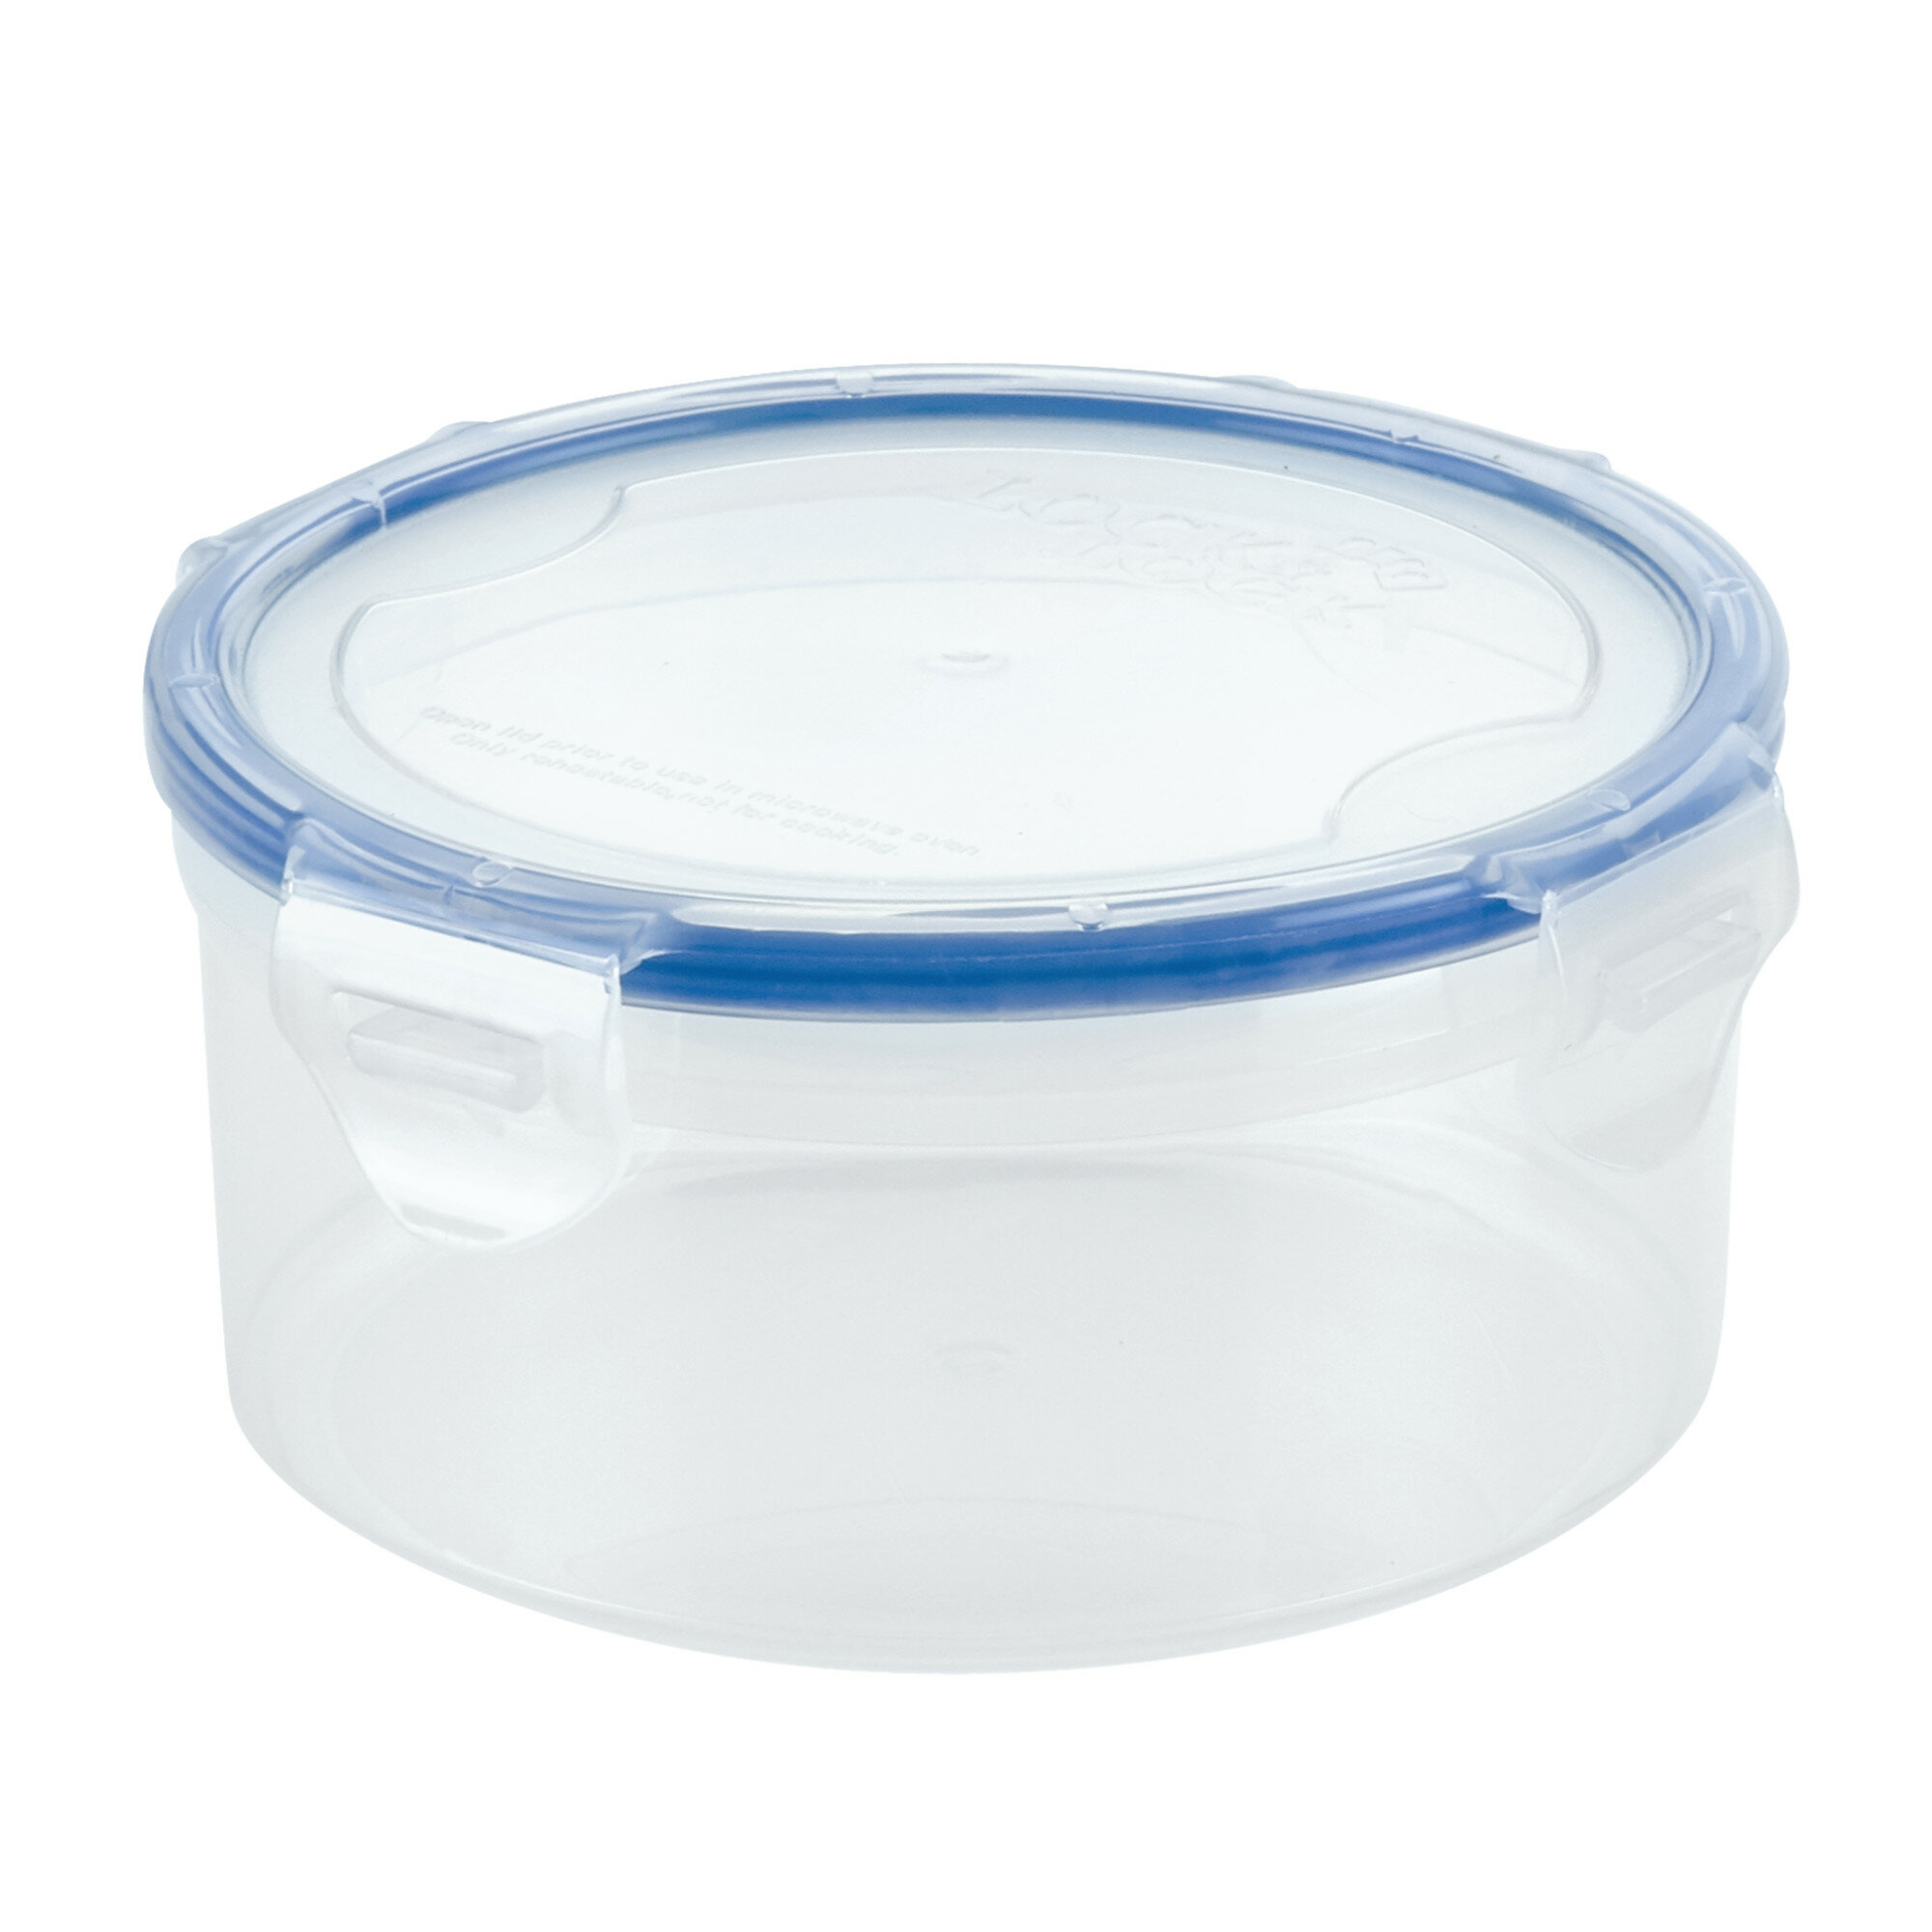 at Home Plastic SM Crystal Round Food Storages with Lids (3 ct)